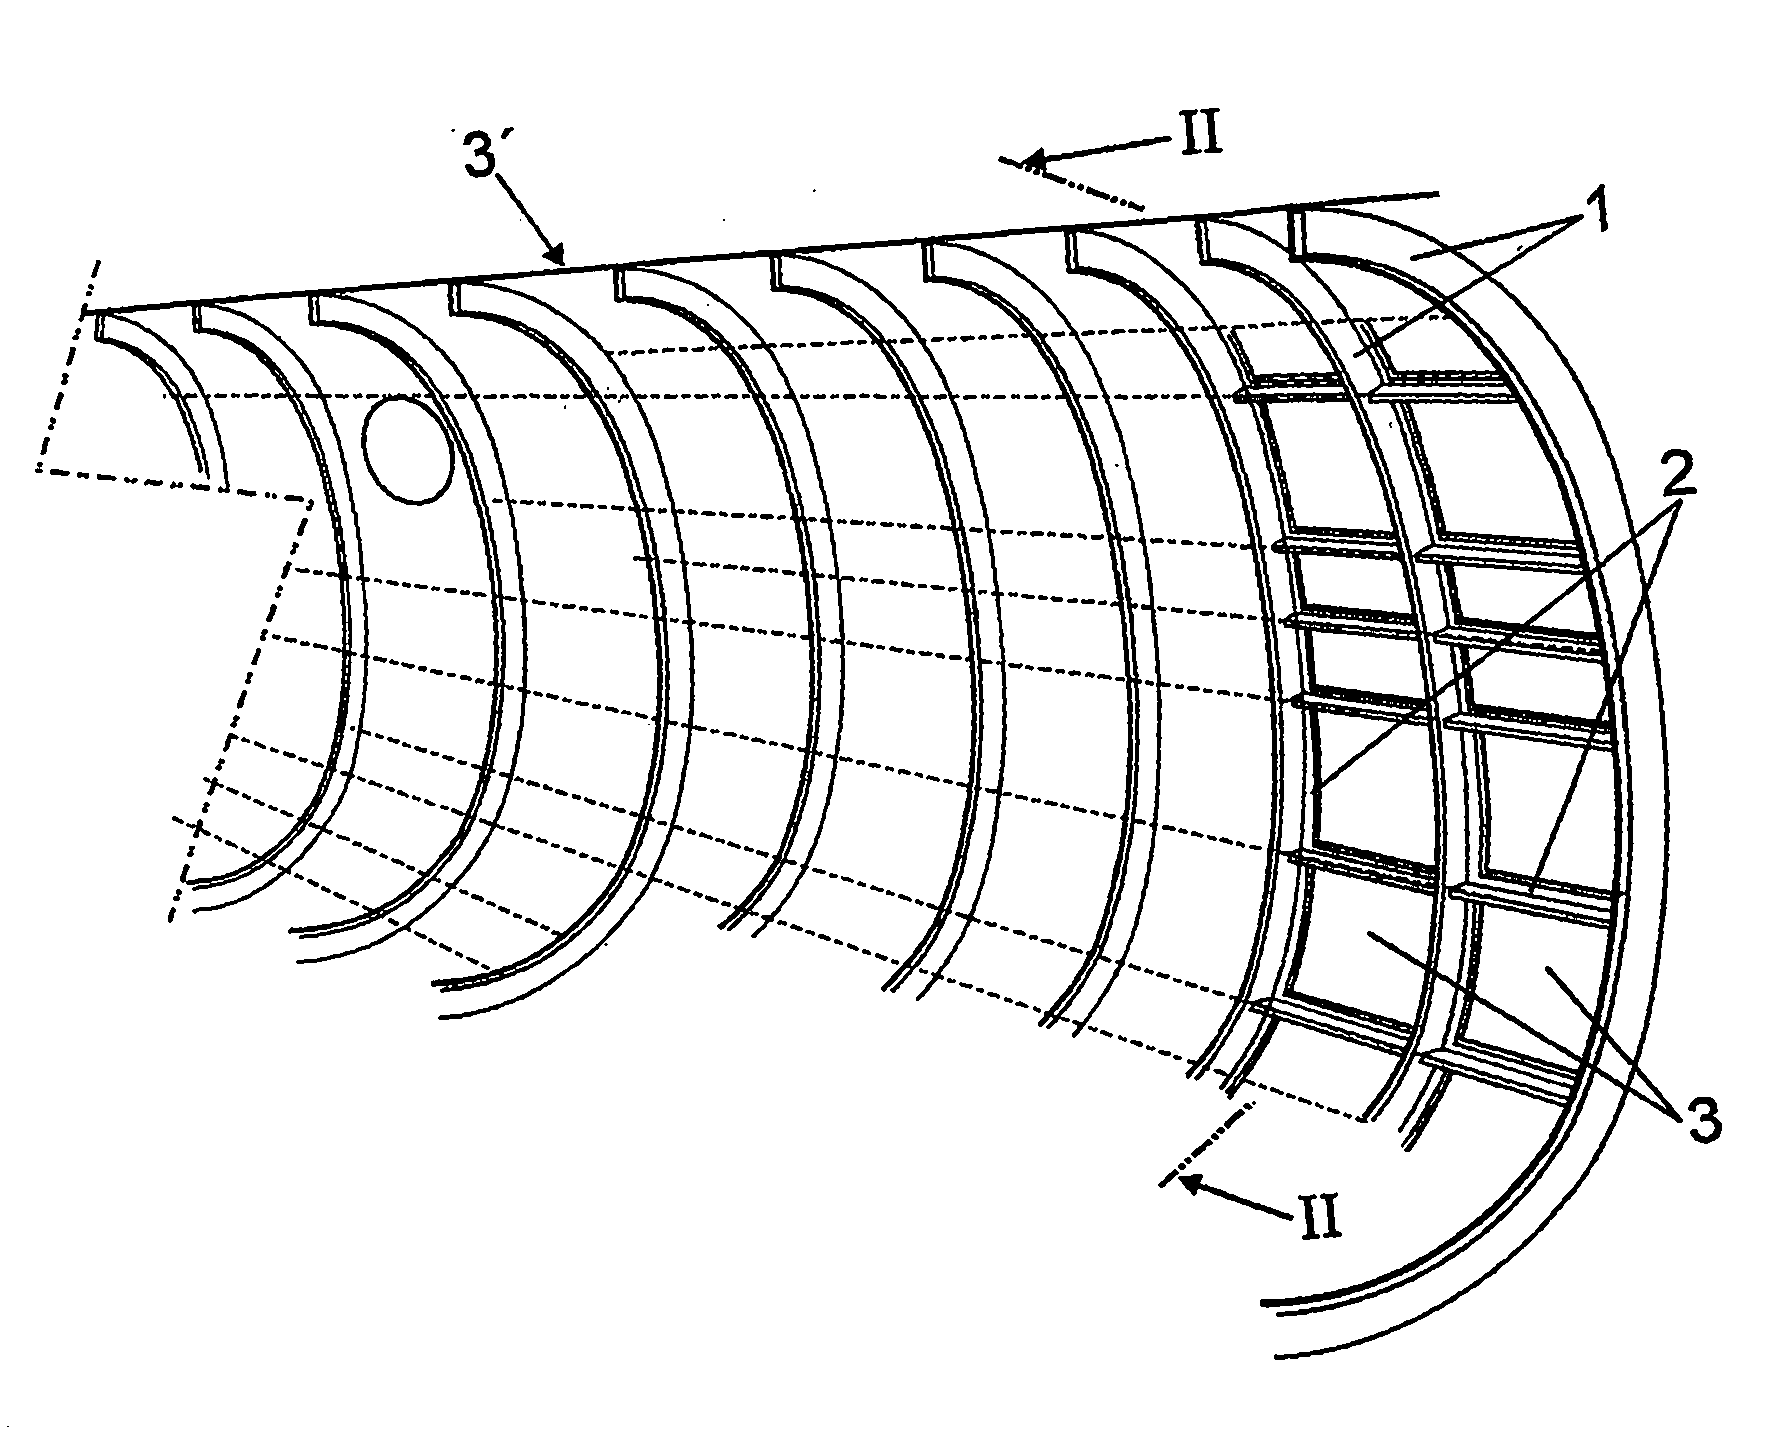 Coupling system intended for use between cladding and structural elements supporting same